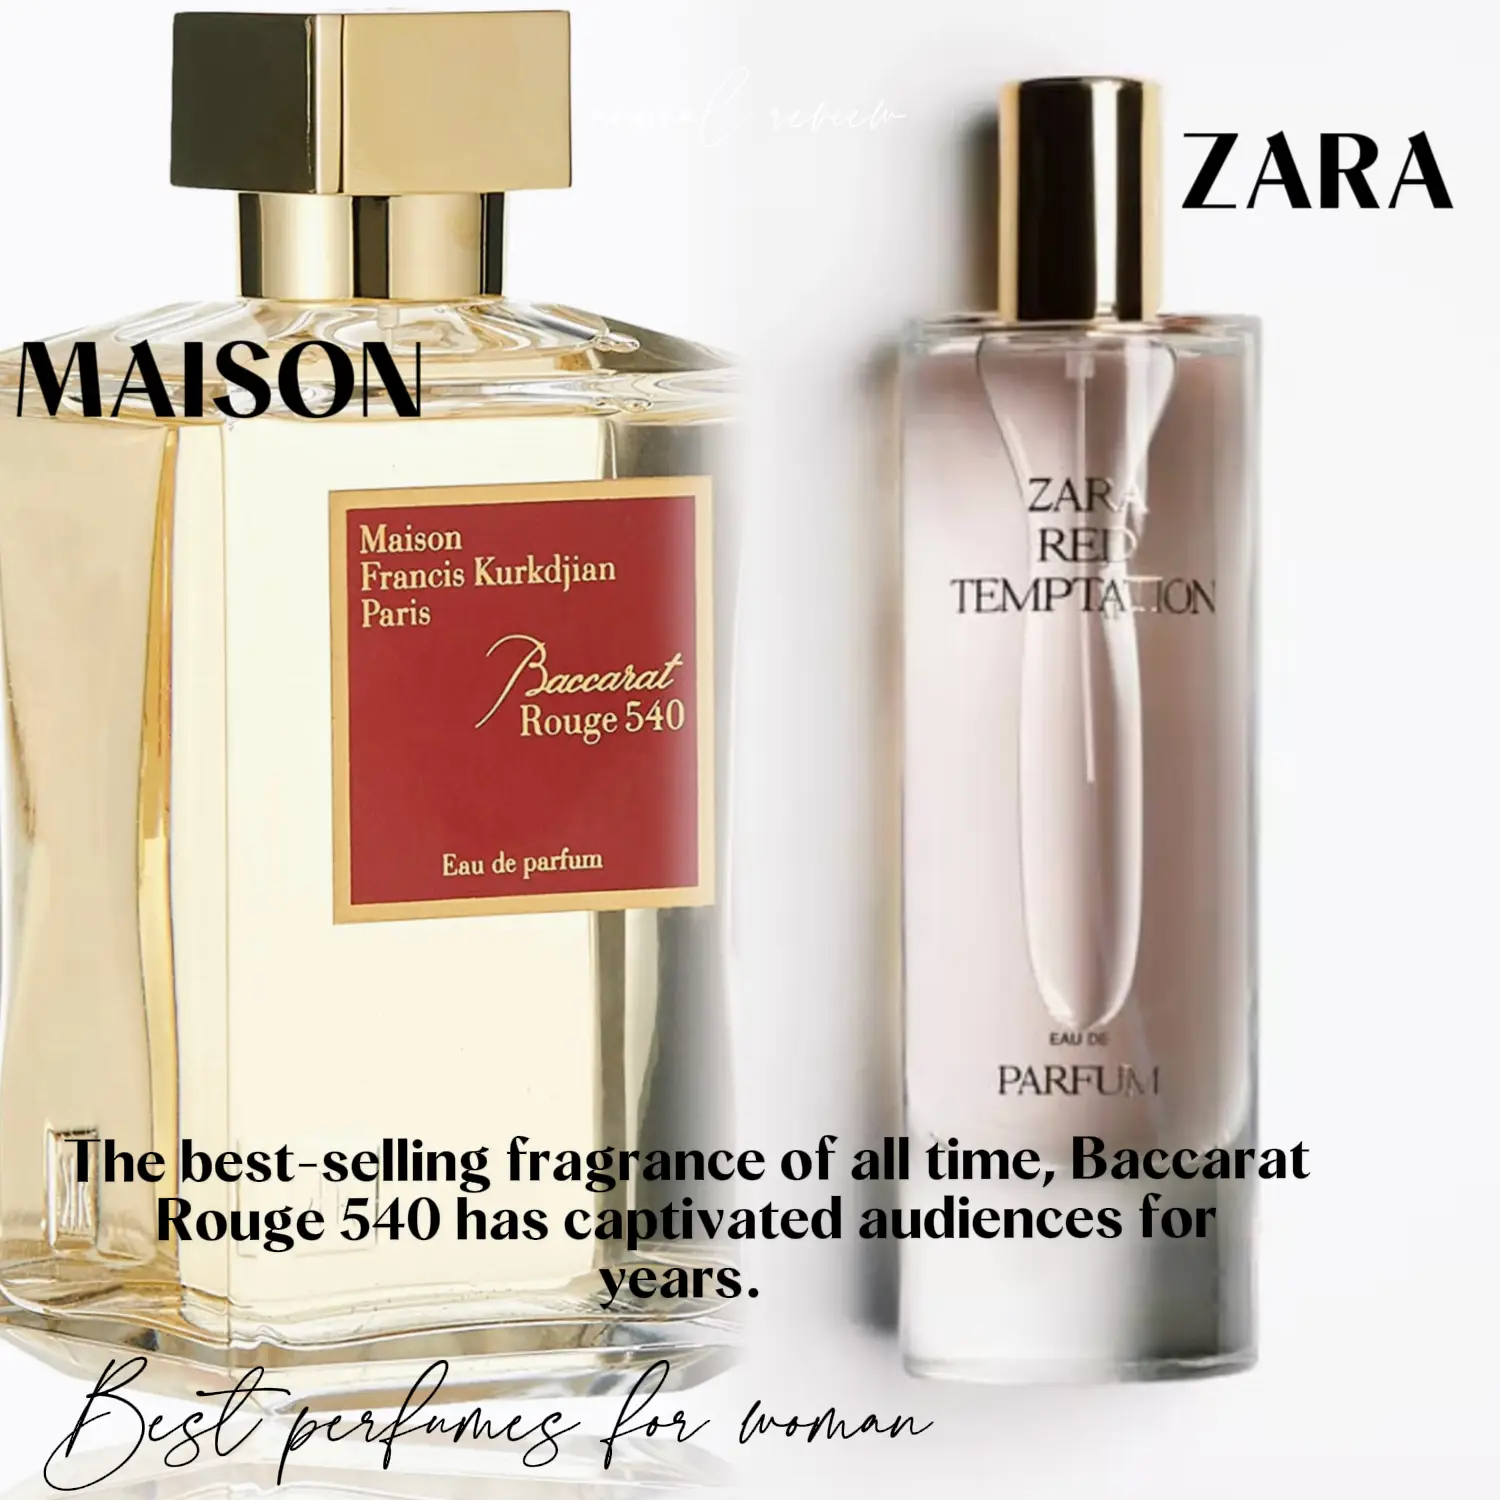 EXTREMELY AFFORDABLE BACCARAT ROUGE 540 DUPE ZARA RED TEMPTATION CHEAP  UNISEX FRAGRANCE CLONE REVIEW 